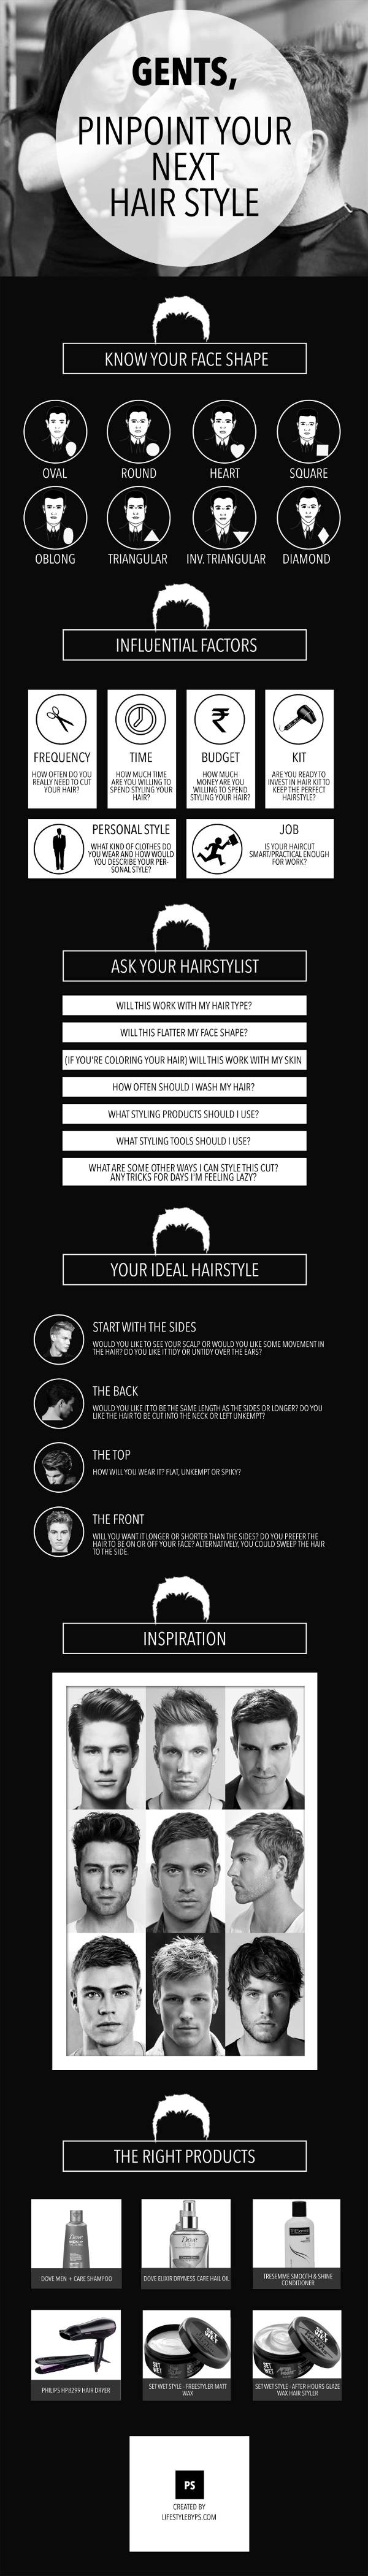 picking-a-new-mens-hairstyle